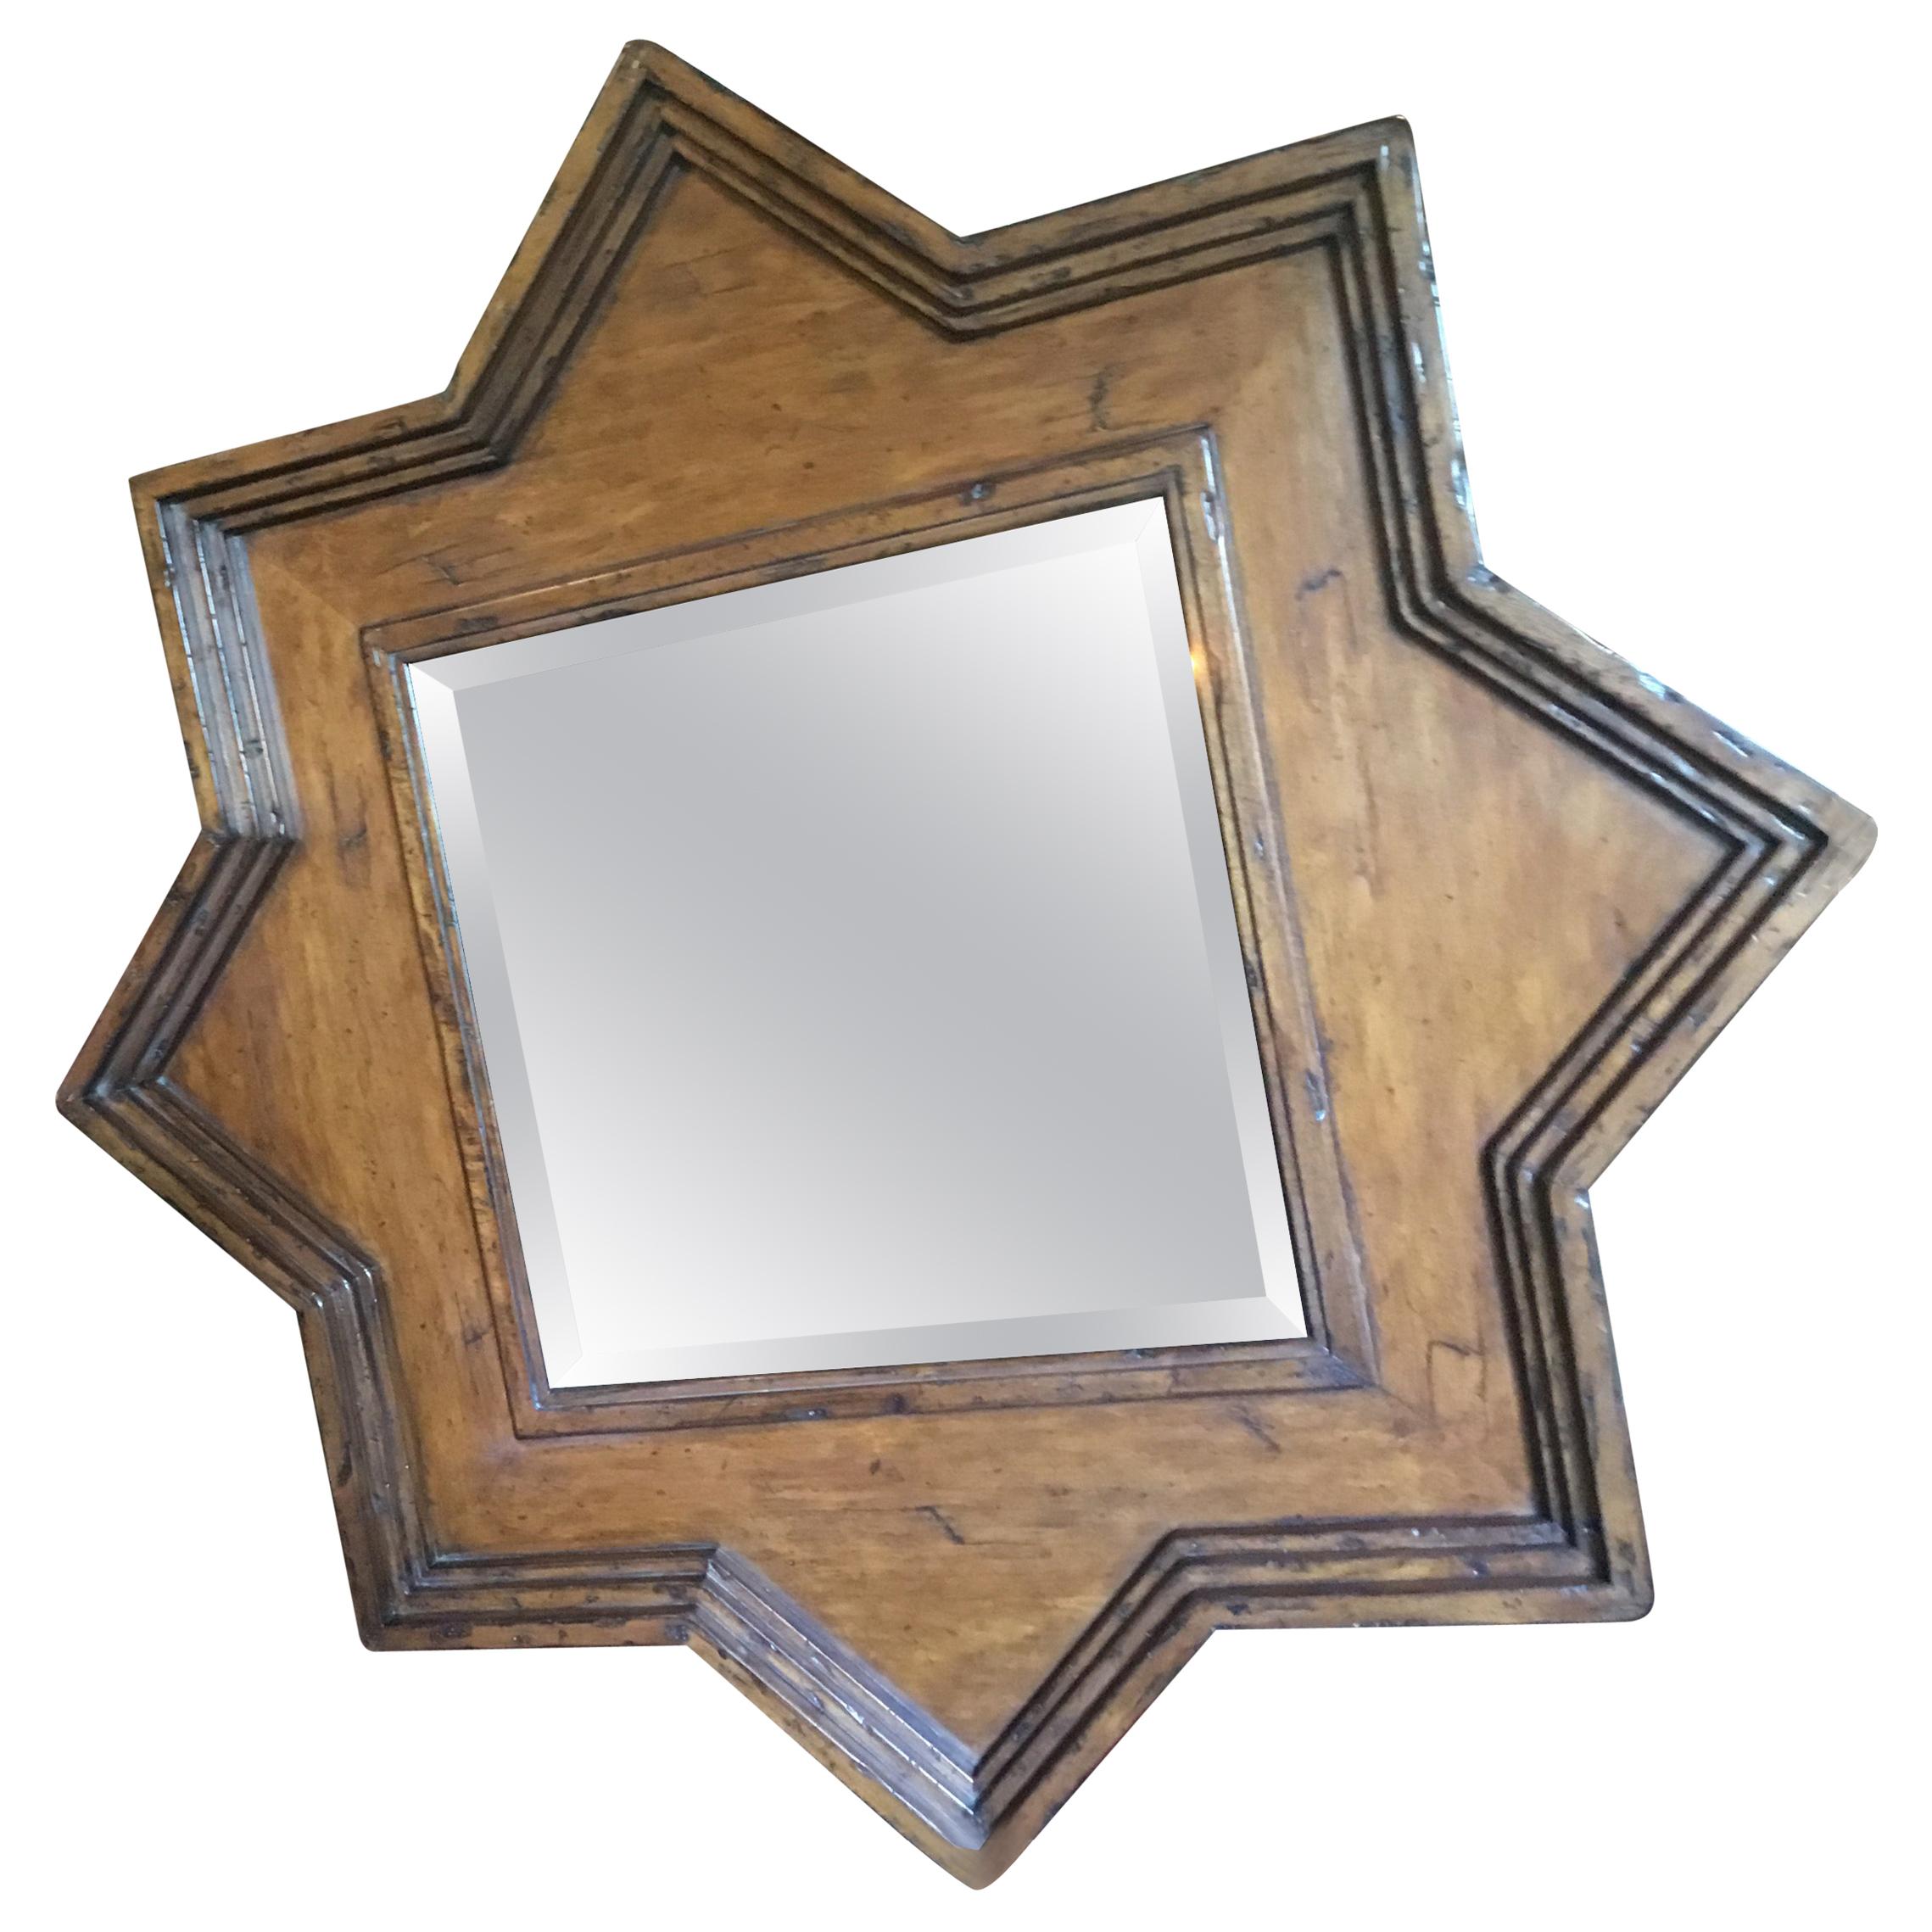 Rustic Star Shaped Rustic Frame with Square Shaped Beveled Mirror For Sale